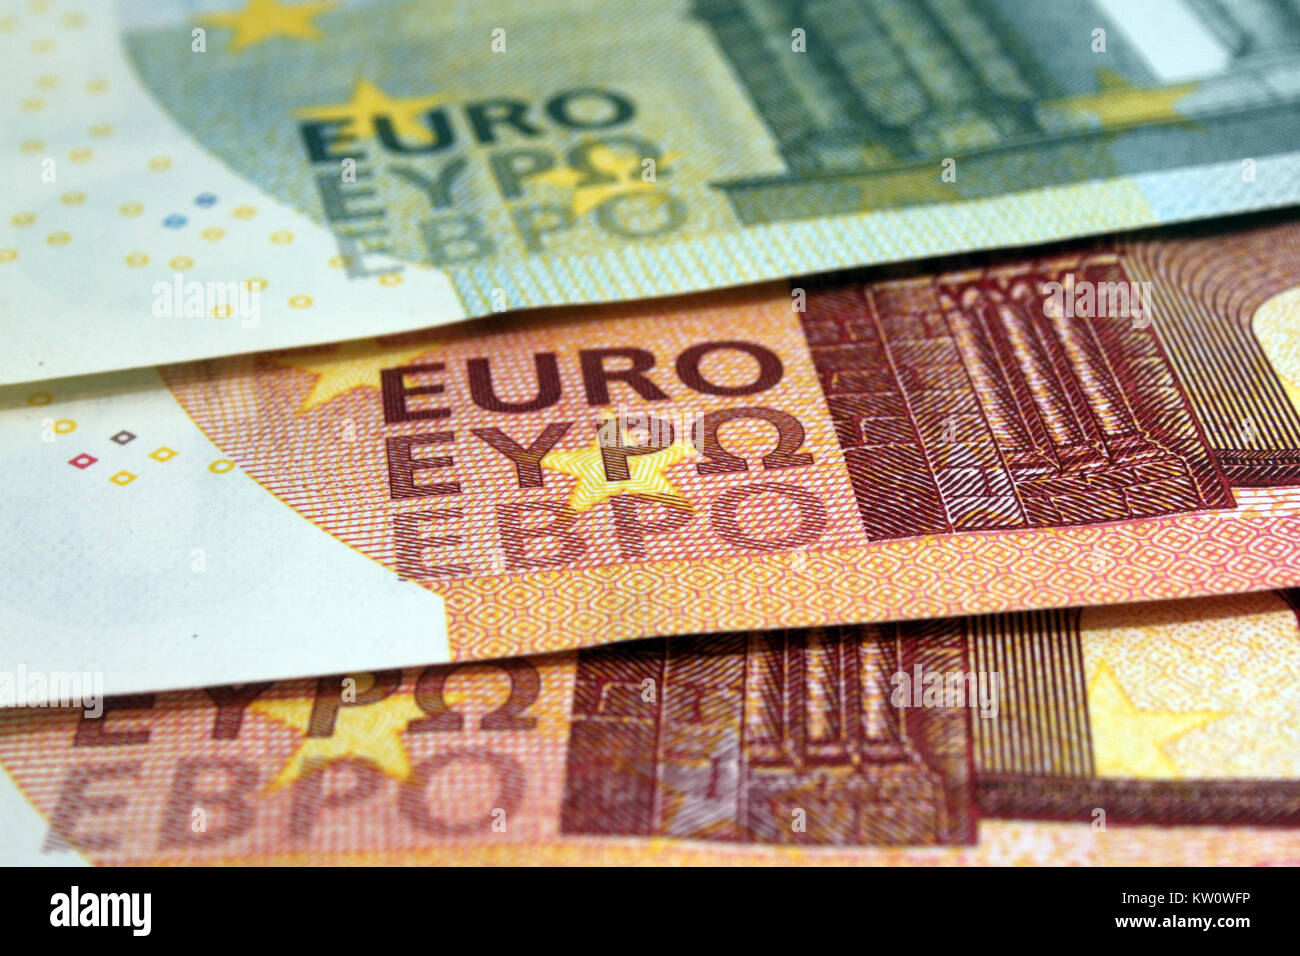 Euro banknotes on the table, still life Stock Photo - Alamy